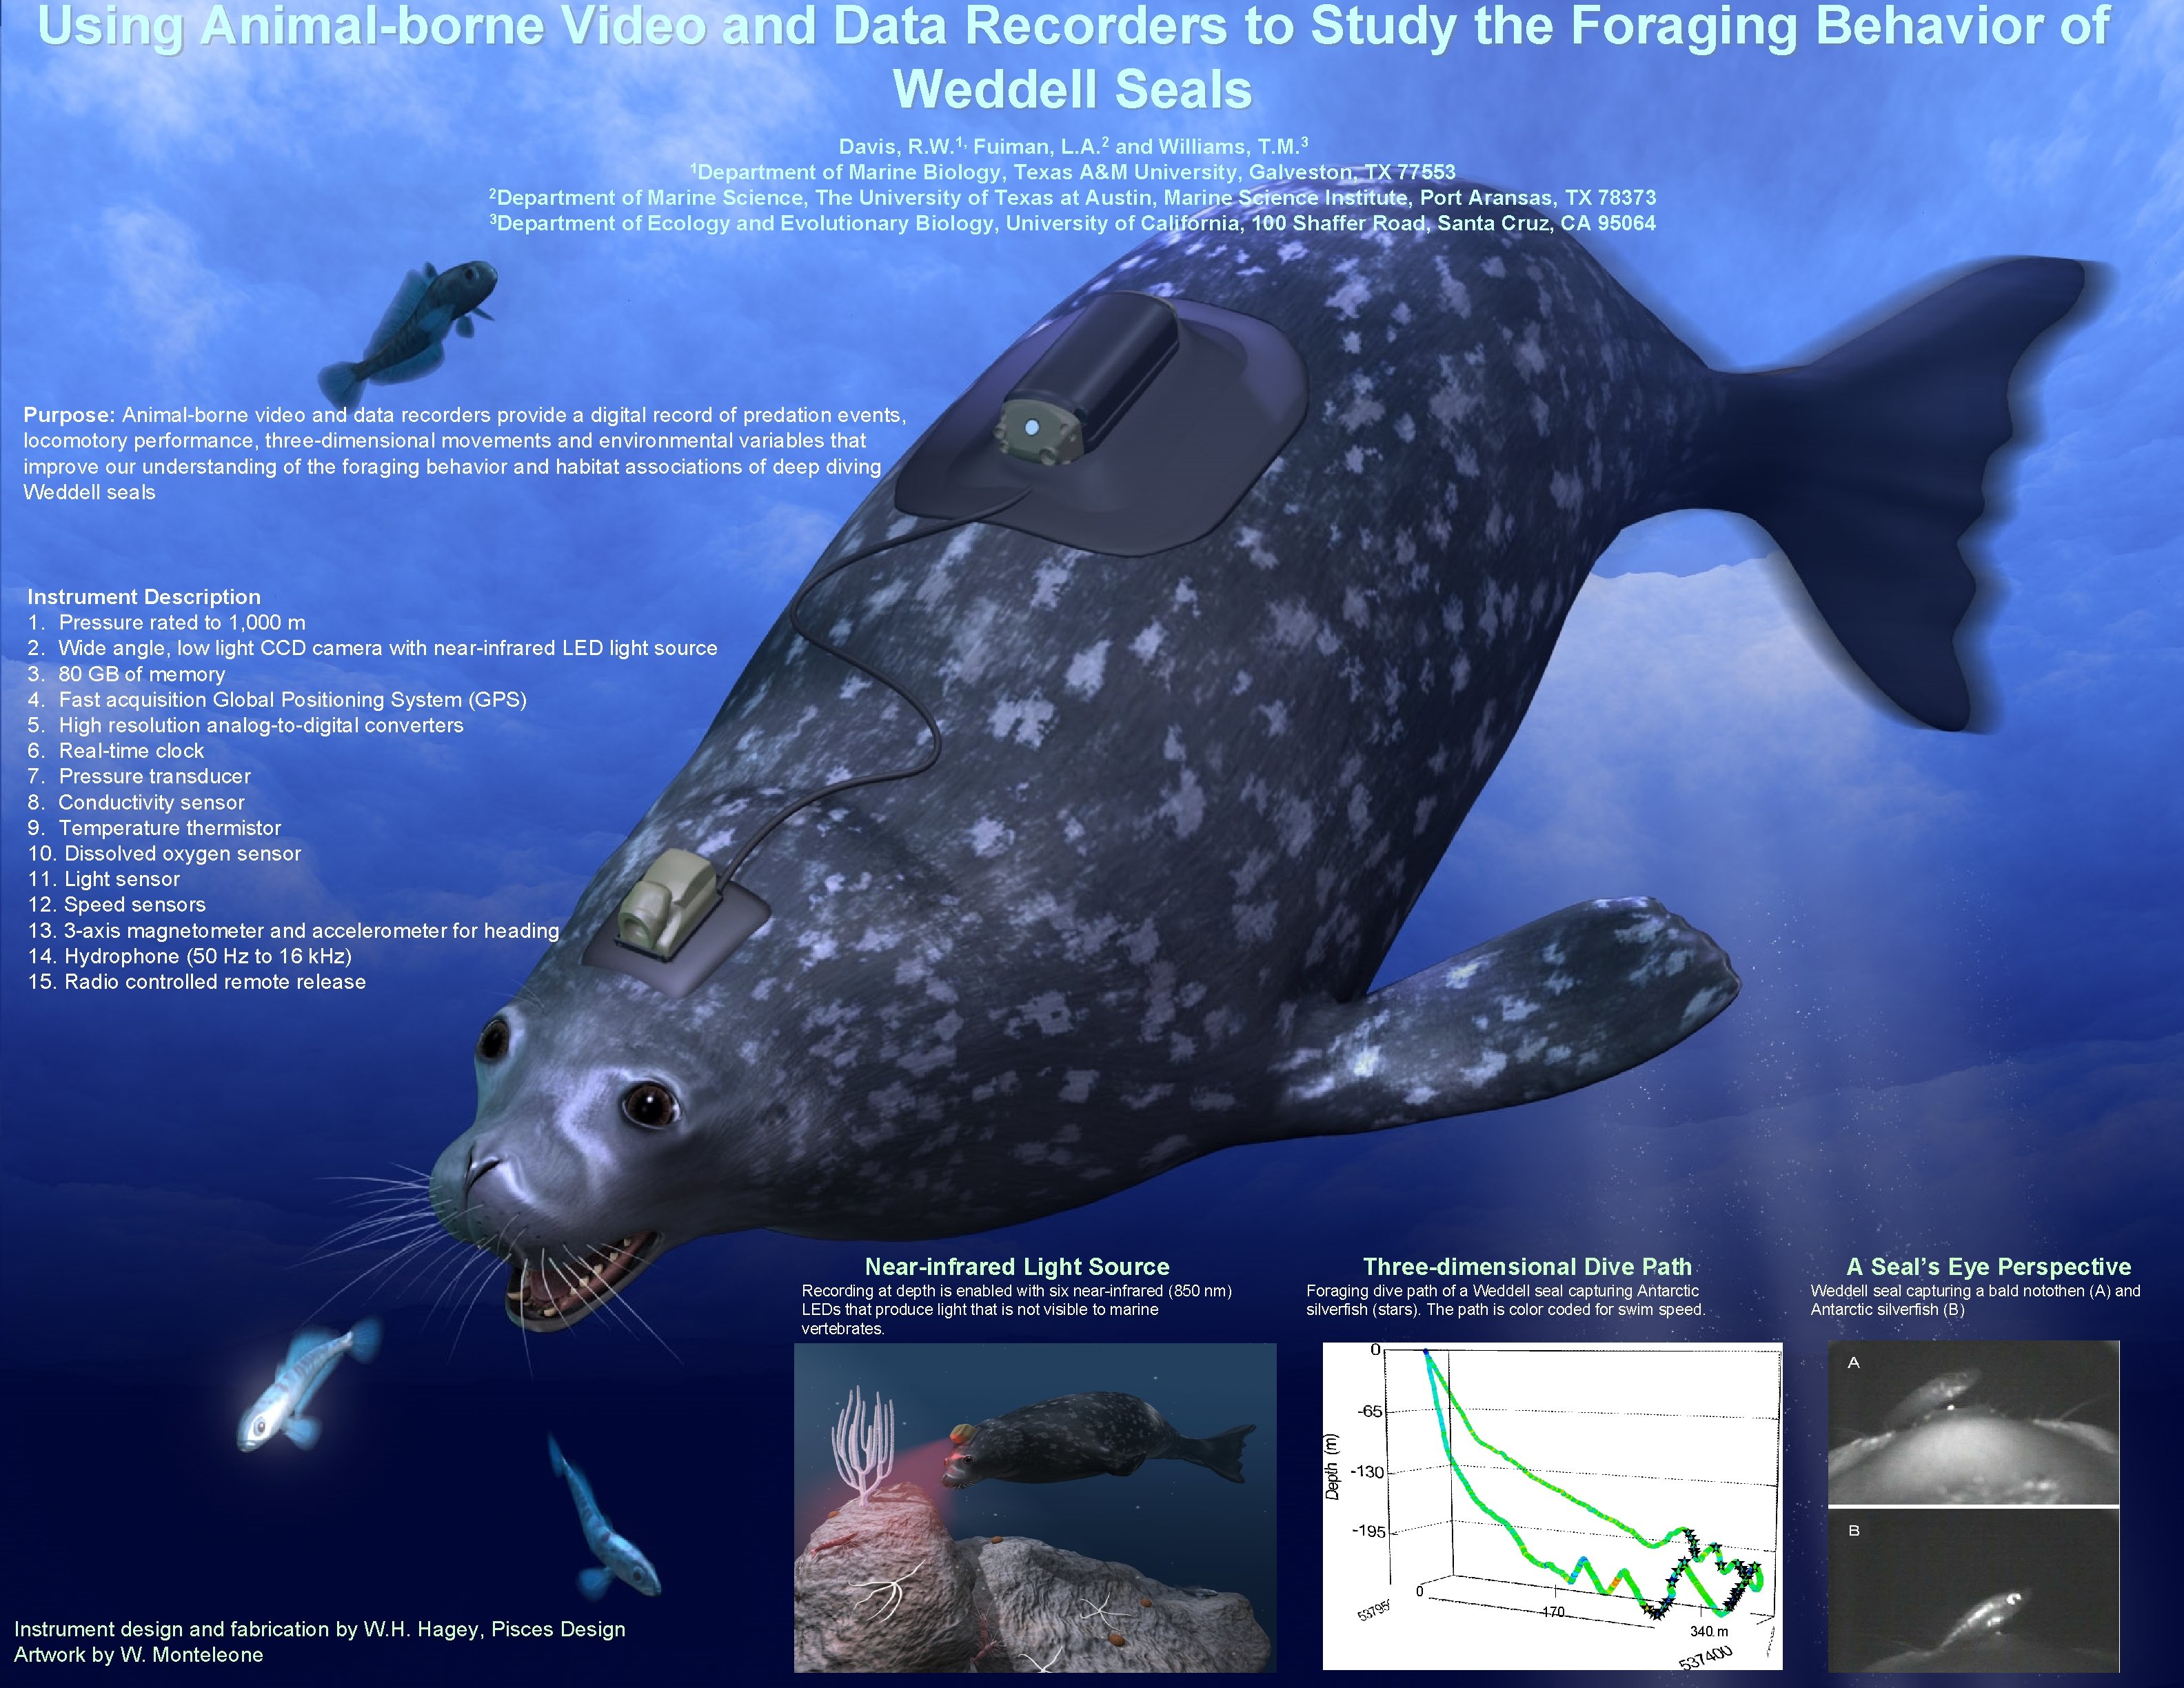 Using Animal-borne Video and Data Recorders to Study the Foraging Behavior of Weddell Seals